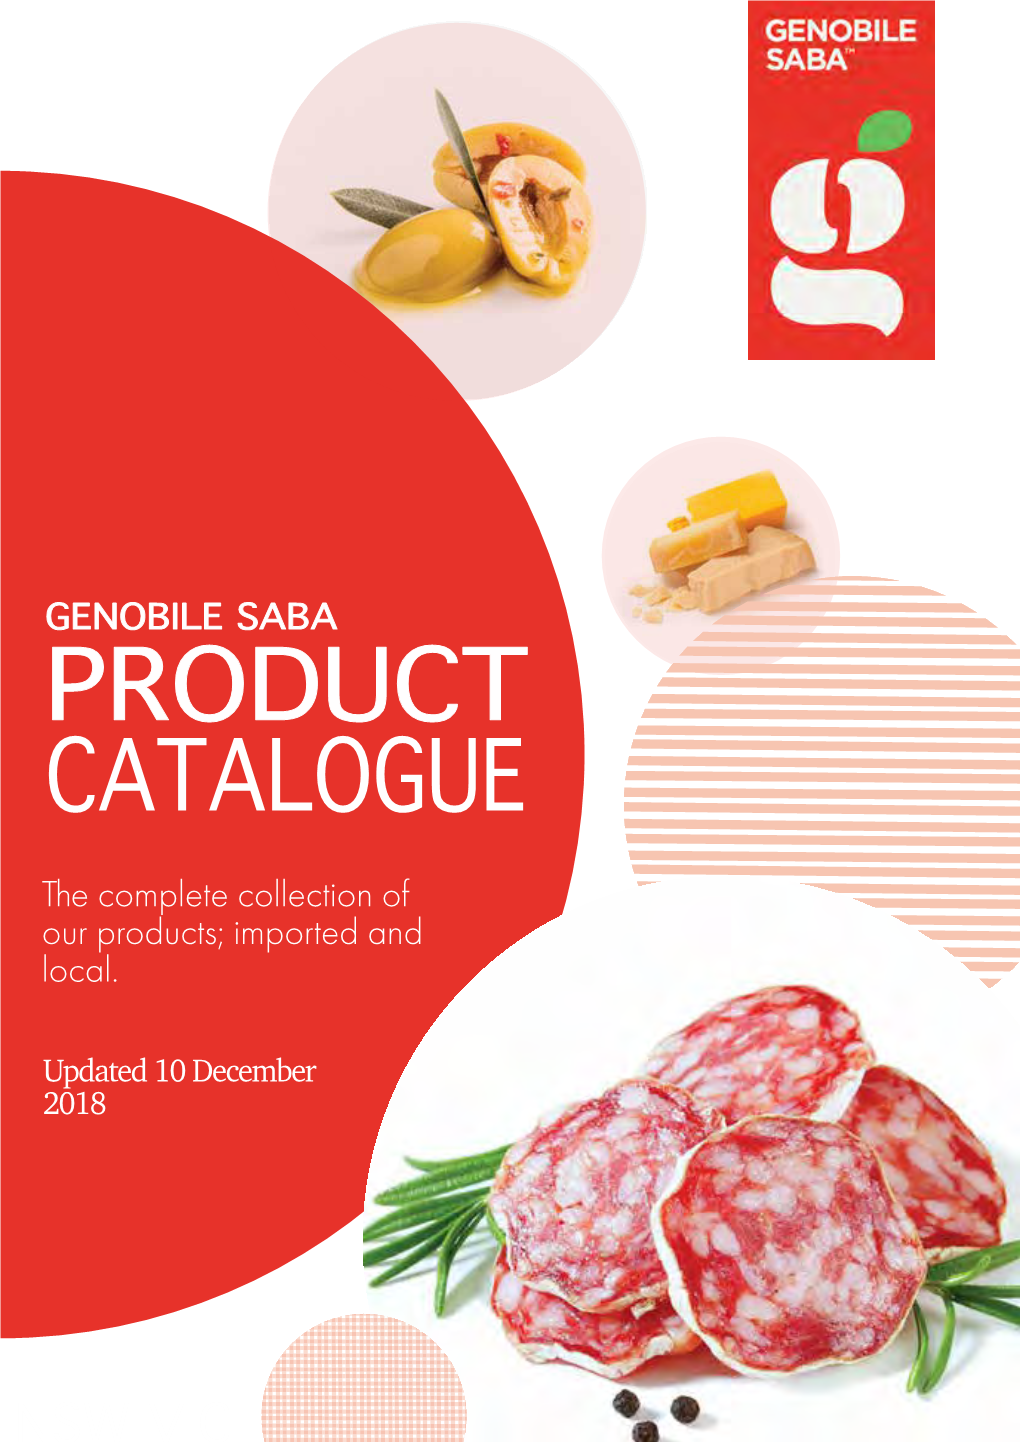 GENOBILE SABA PRODUCT CATALOGUE the Complete Collection of Our Products; Imported and Local